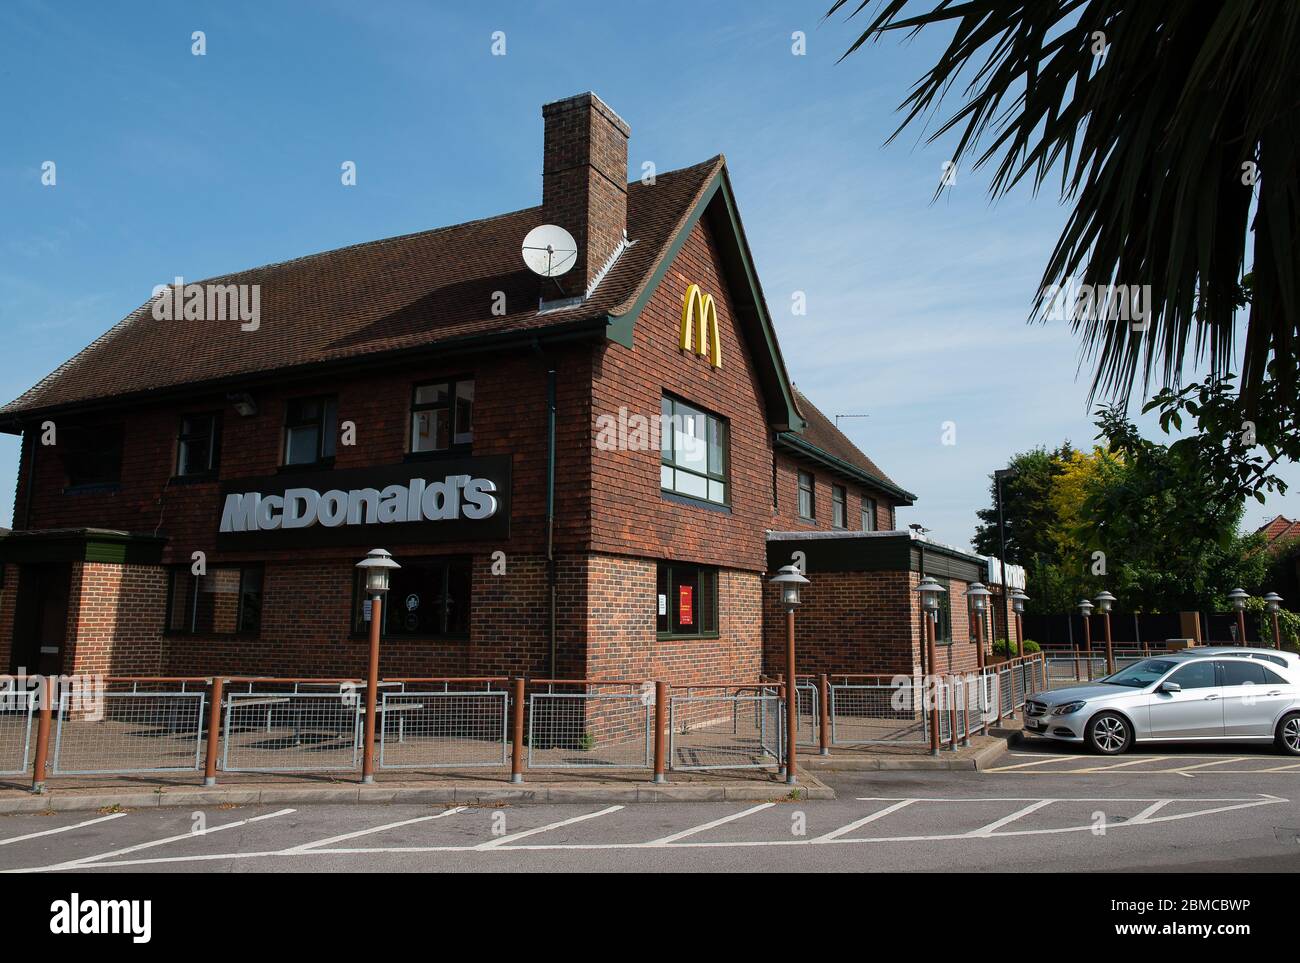 Slough, Berkshire, UK. 7th May, 2020. McDonald's have announced that 15 of their UK restaurants are reopening on 13th May 2020 to do home deliveries only via Uber Eats and Just Eat. Their restaurants have been shut during the Coronavirus Pandemic lockdown. The Slough McDonald's Prince of Wales Drive Thru remains temporarily closed. Credit: Maureen McLean/Alamy Stock Photo